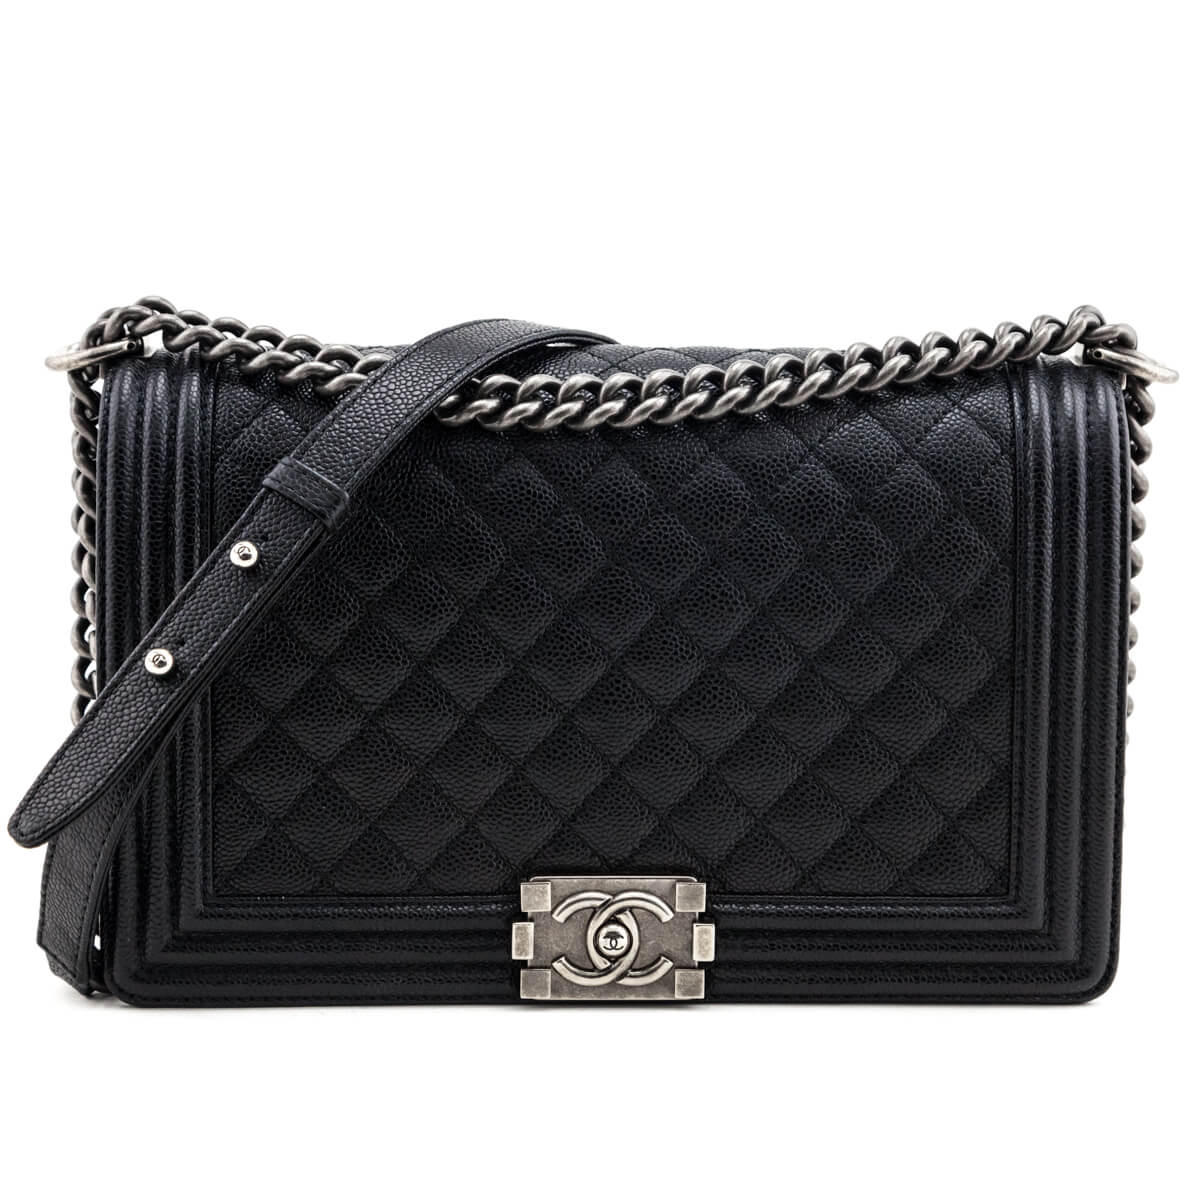 Chanel Black Caviar Quilted New Medium Boy Flap Bag - Love that Bag etc - Preowned Authentic Designer Handbags & Preloved Fashions